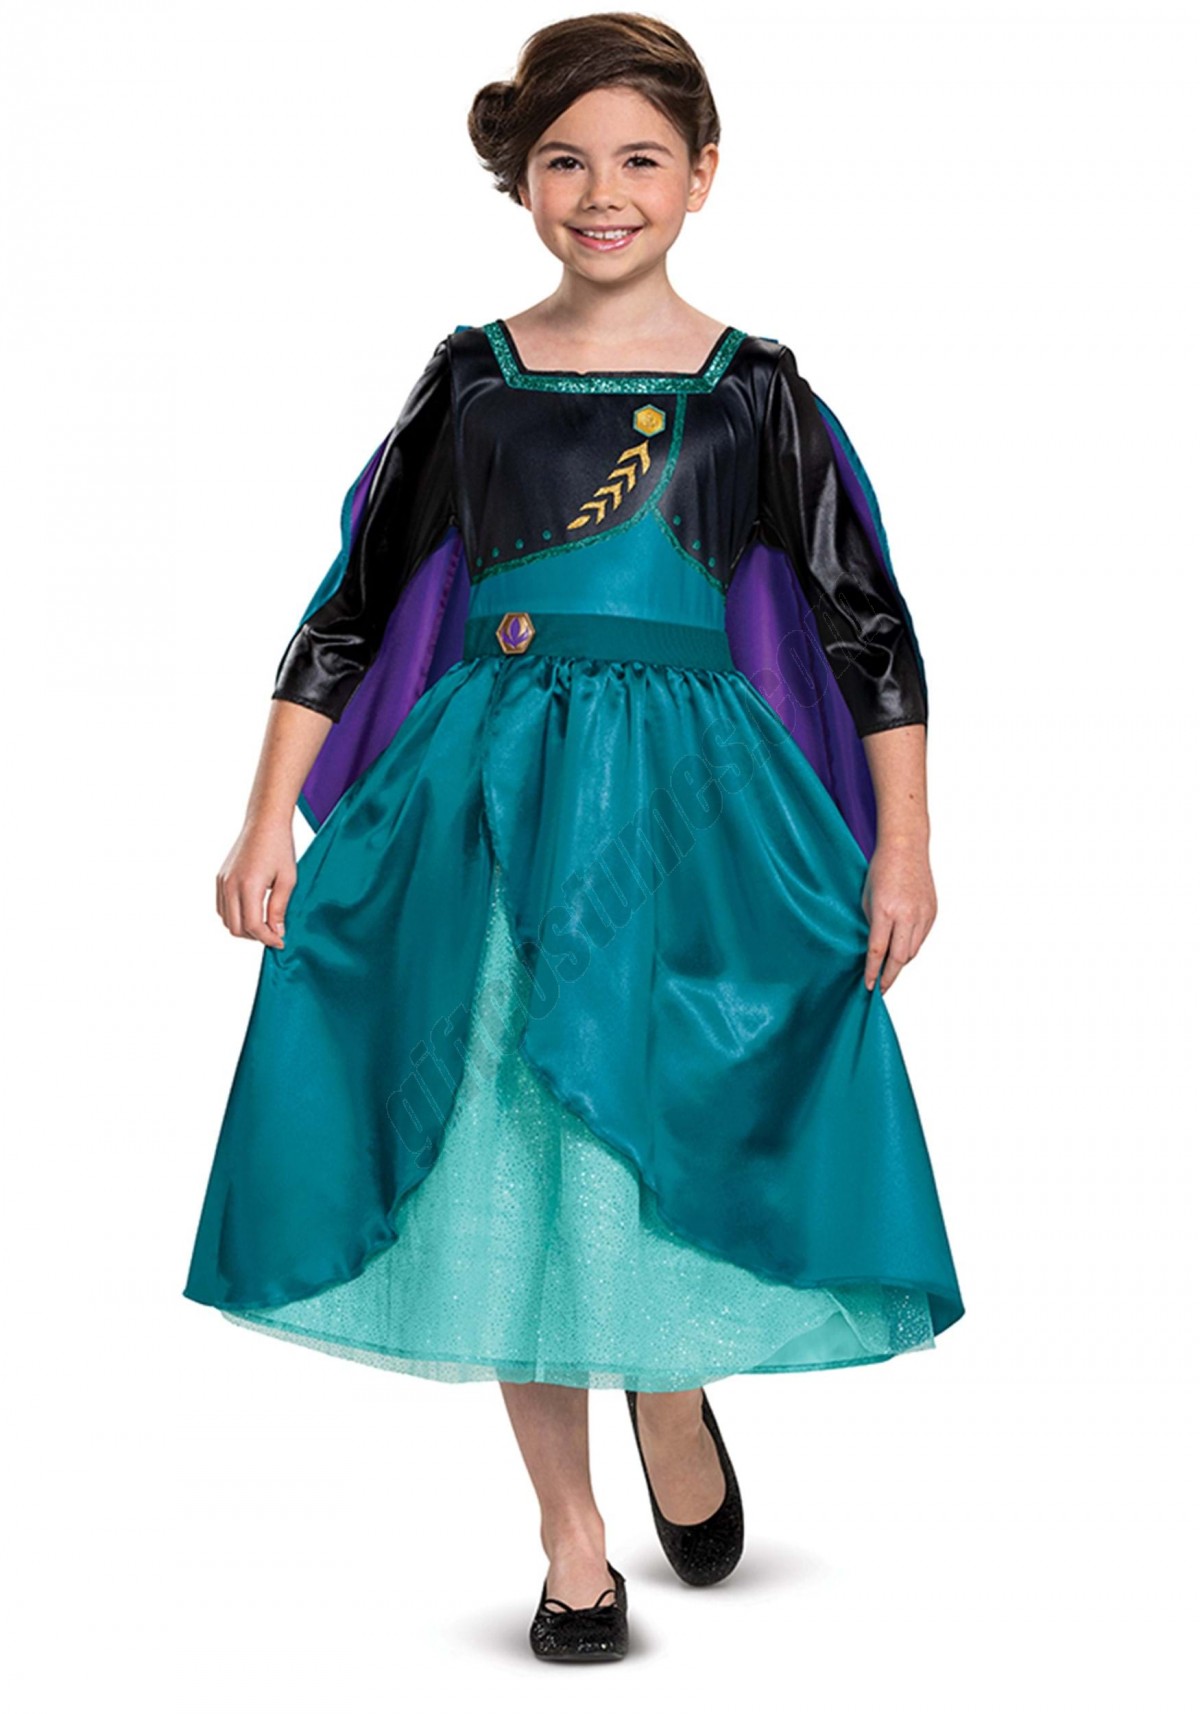 Frozen Queen Anna Classic Costume for Kids Promotions - -0